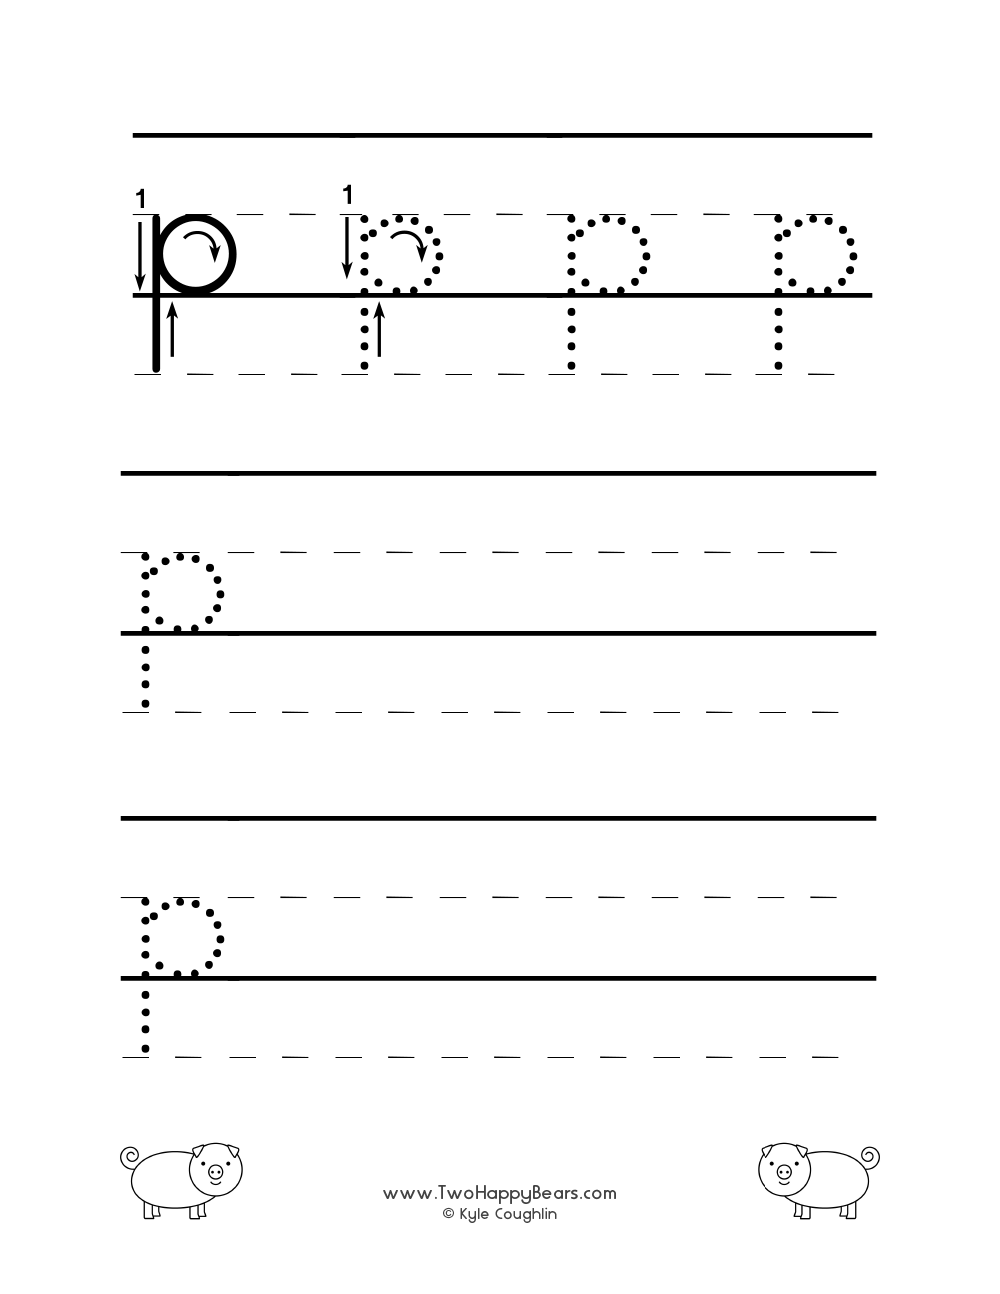 Worksheet for tracing and writing the lowercase letter P, in free printable PDF format.